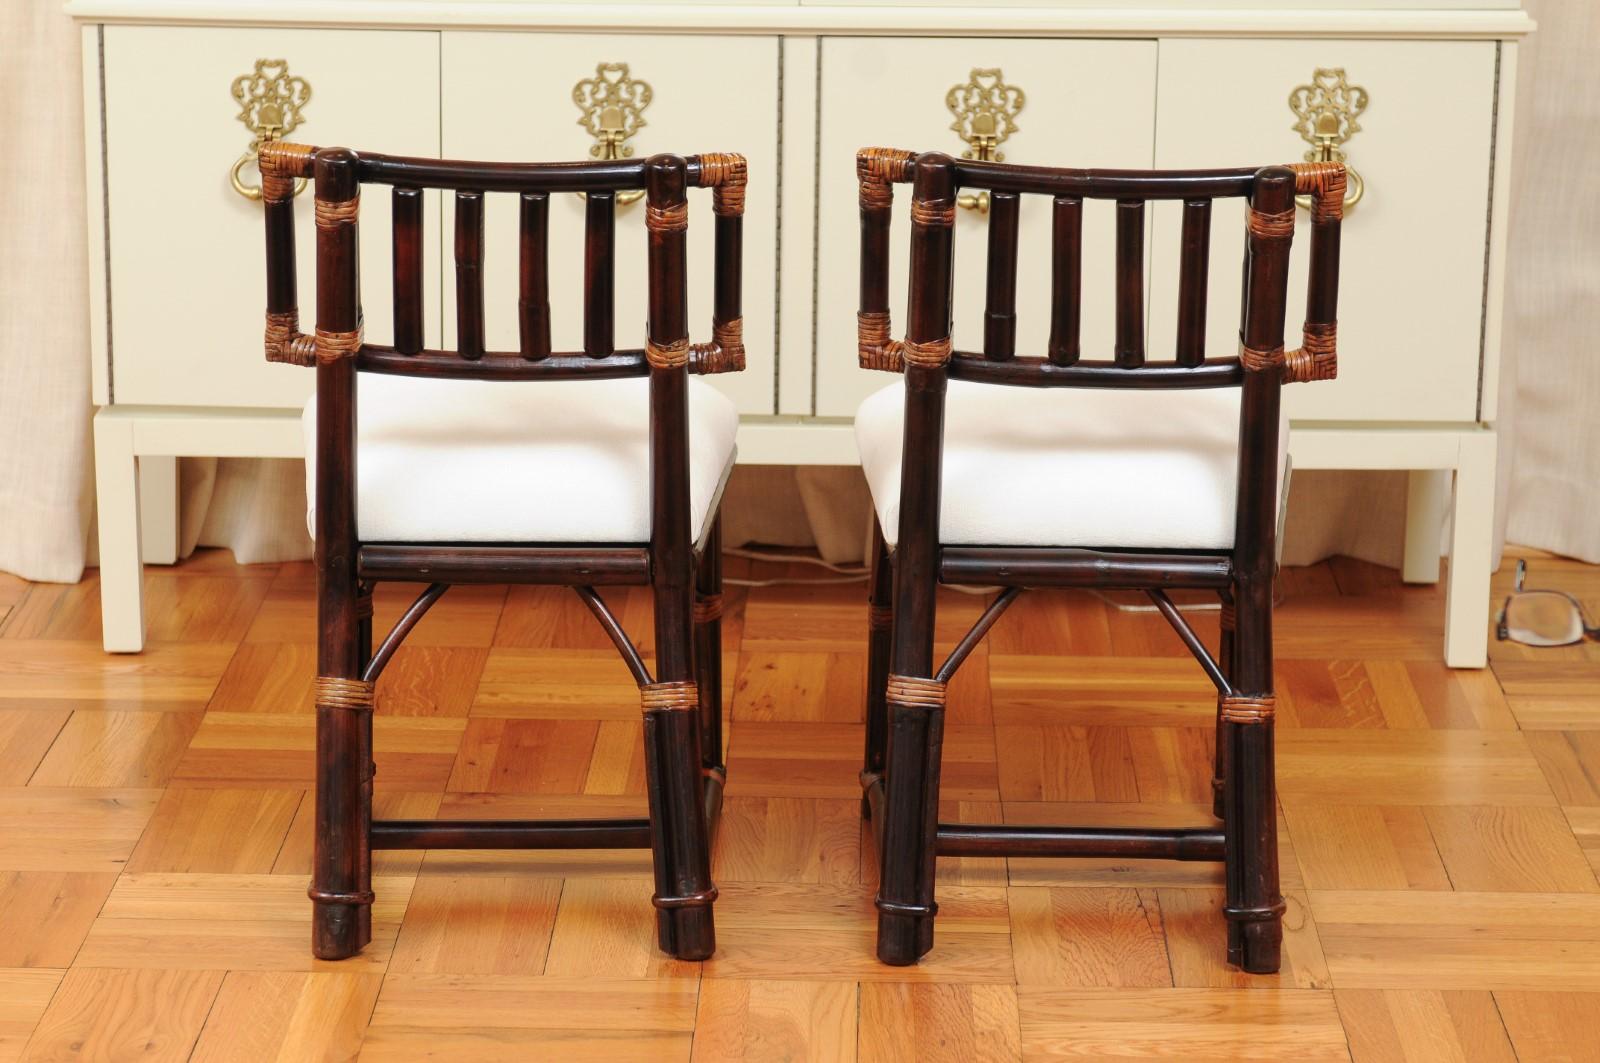 Radiant Set of 8 Rattan Chairs in Cordovan and Caramel by Wisner for Ficks Reed For Sale 1